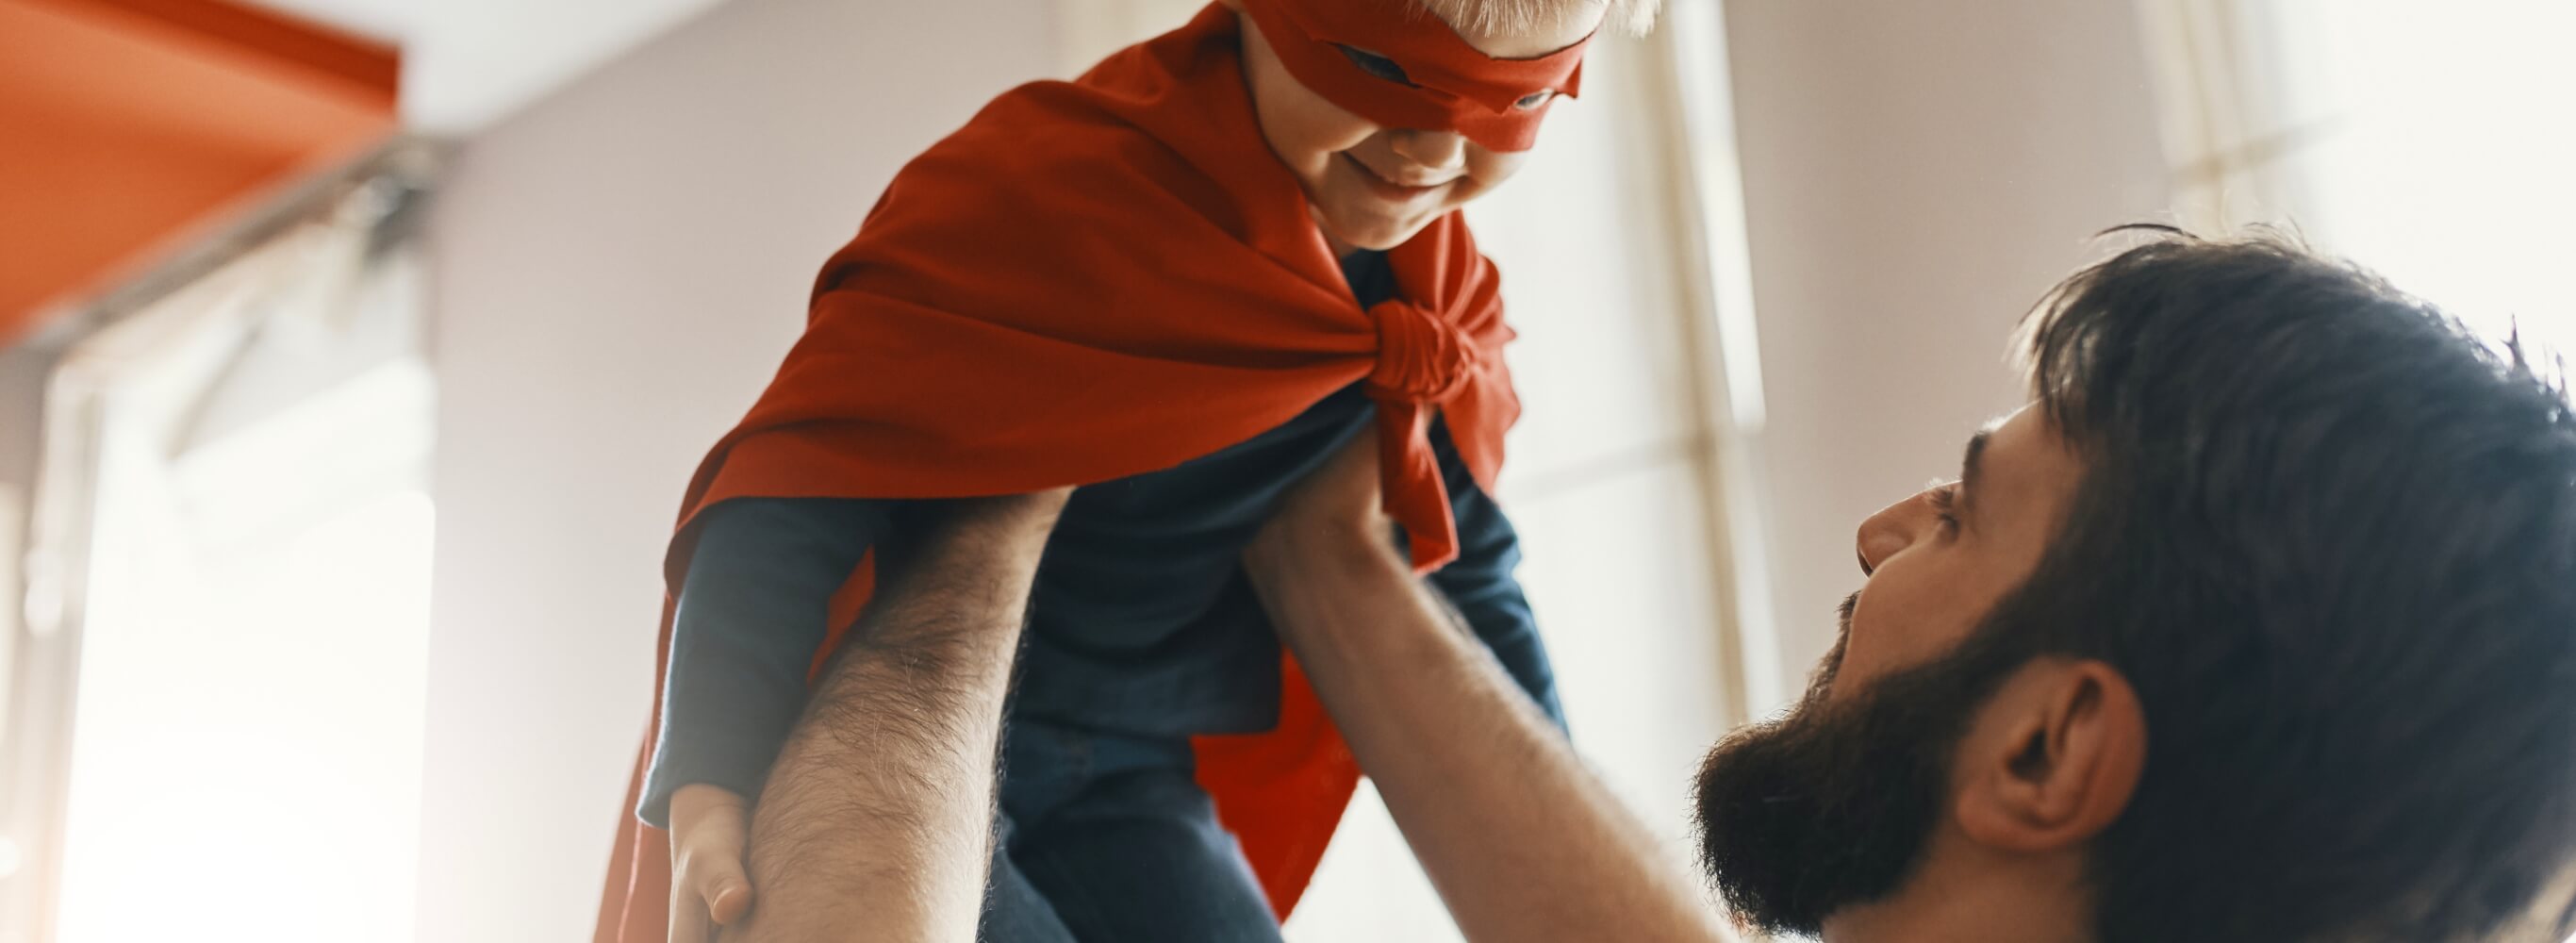 Man holding up his son, dressed as a superhero.